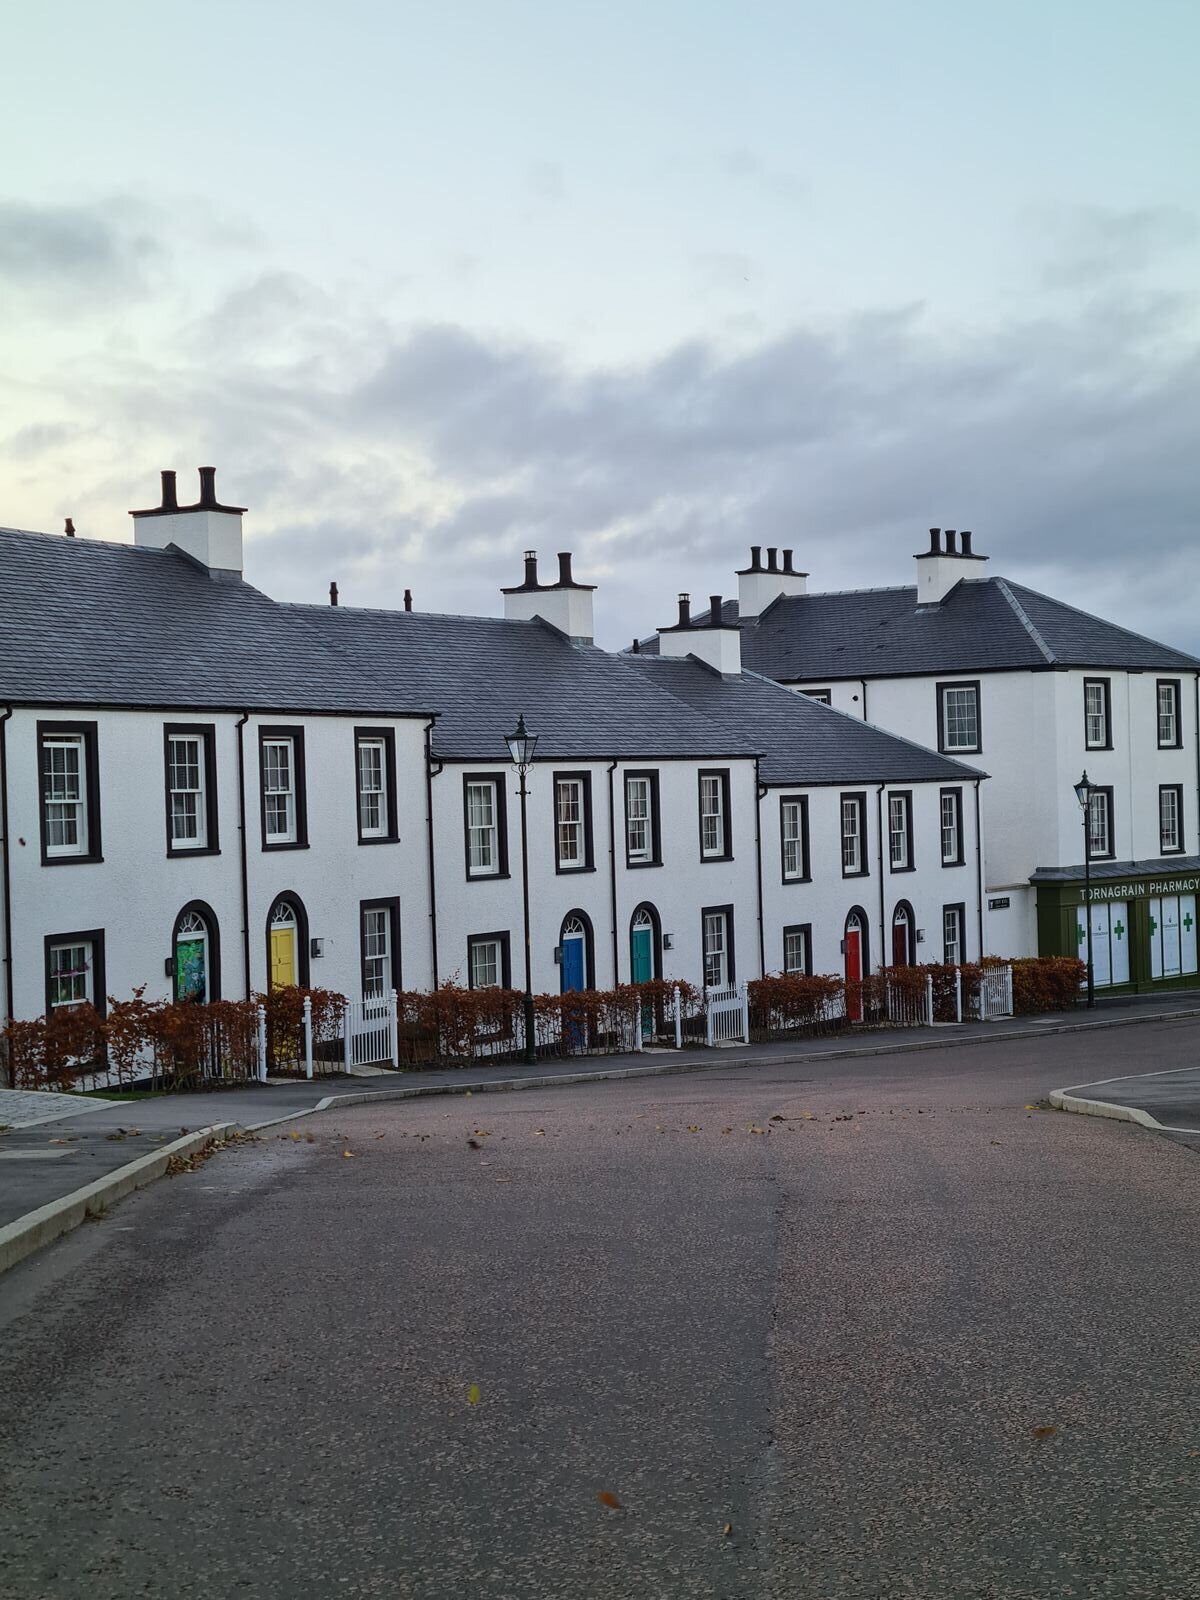 A row of white houses with colourful front doors on a street in Inverness, Scotland